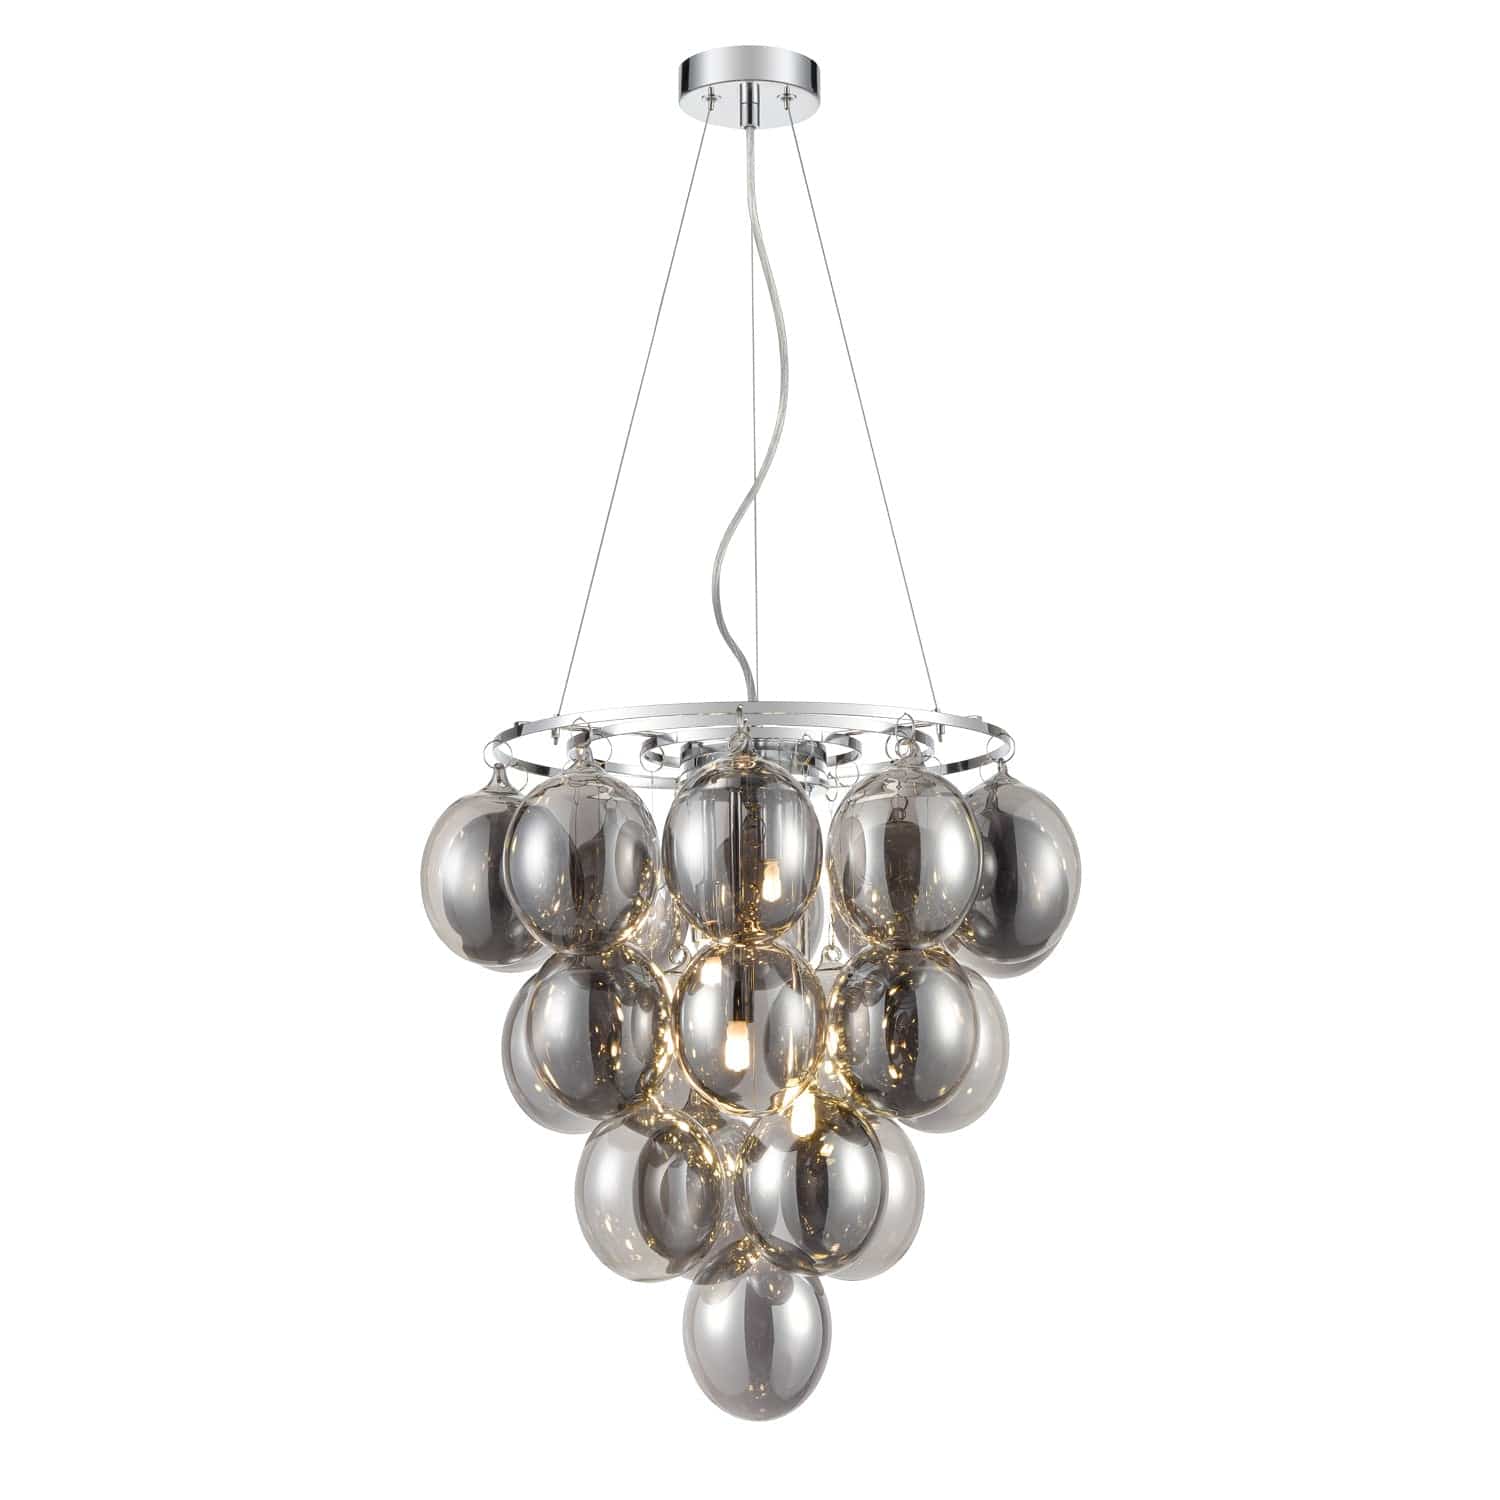 Heavenly Chandeliers Pendant lights Smoked with chrome finish Orb 4 Pendant Light, iridescent or smoked glass